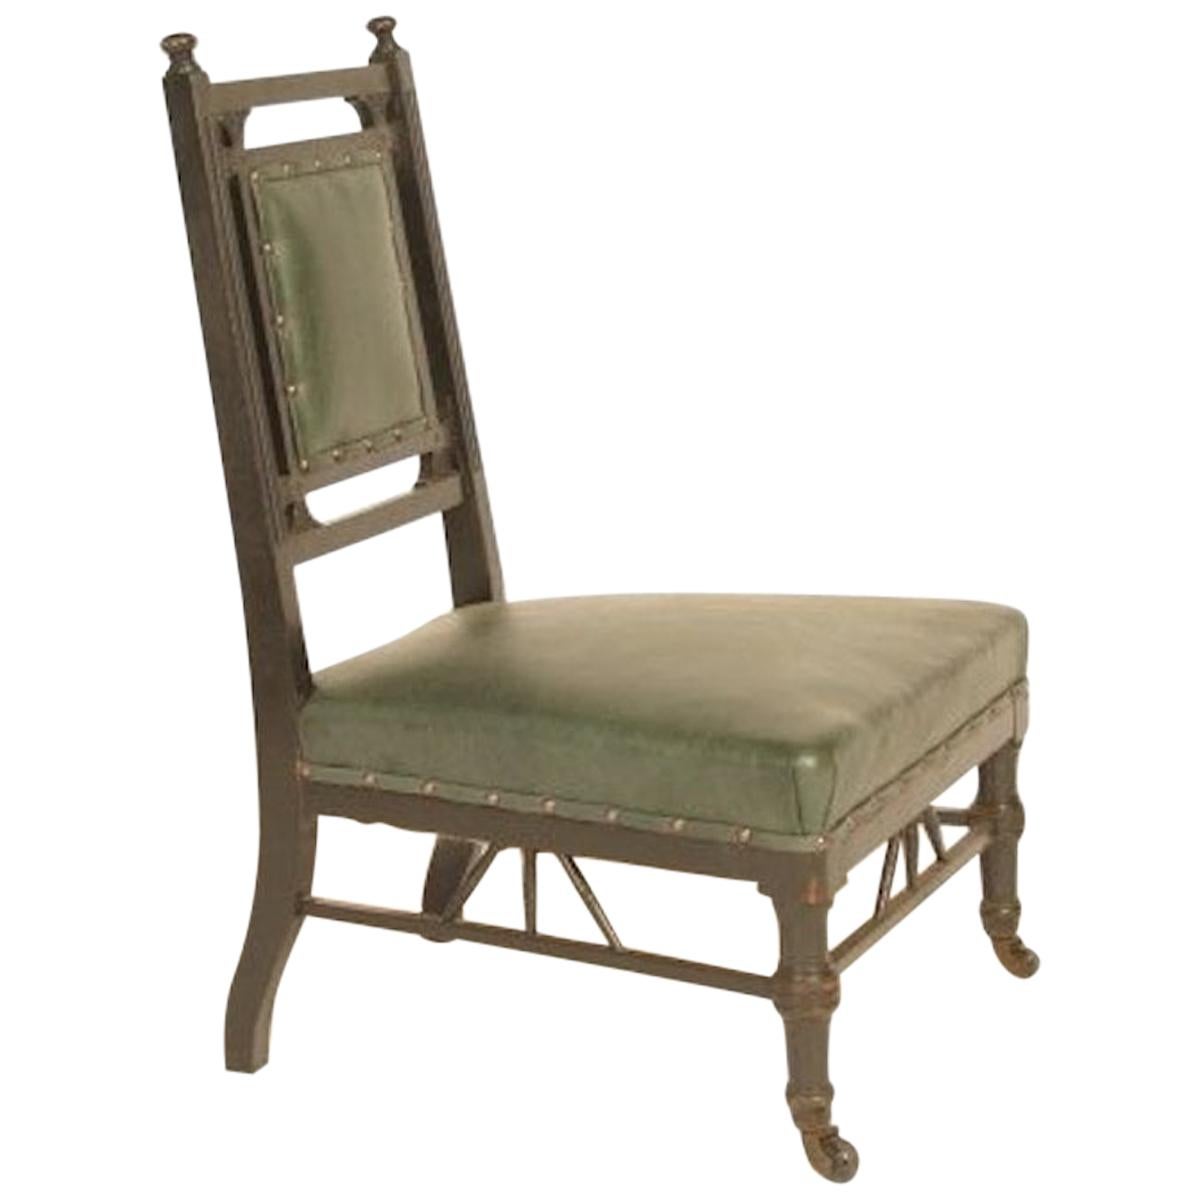 E W Godwin Style of, an Anglo-Japanese Nursing Chair with Subtle Carved Details